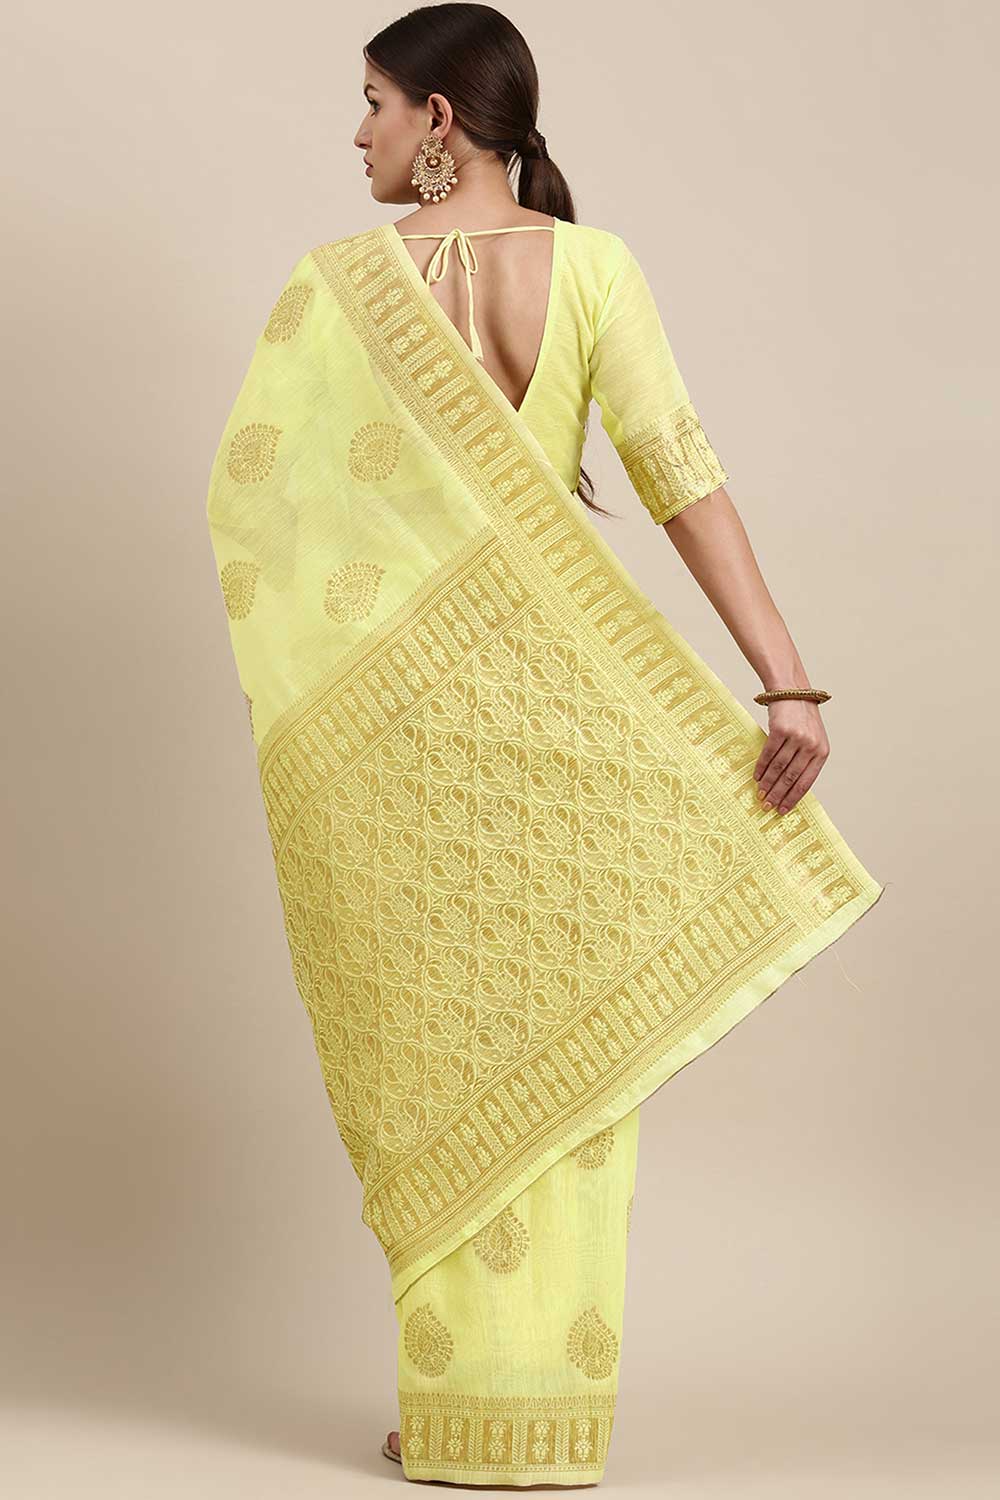 Shop Martina Lemon Yellow Bagh Blended Linen One Minute Saree at best offer at our  Store - One Minute Saree